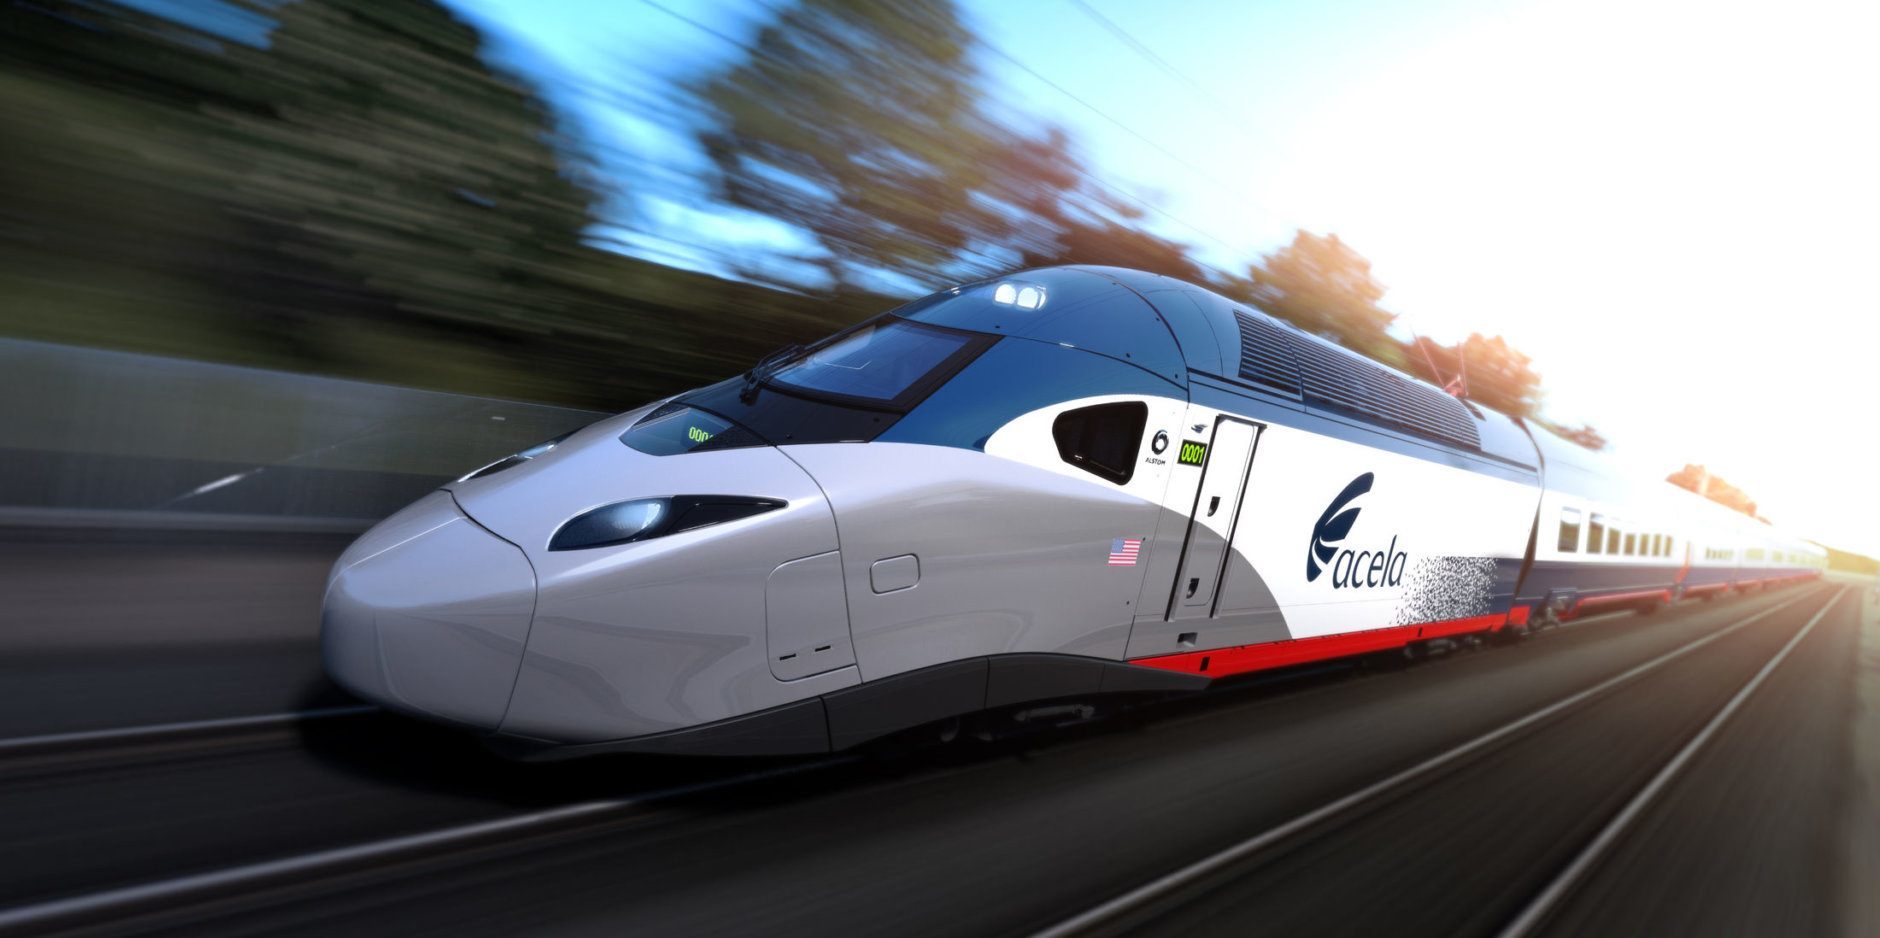 The first prototype of the new Acelas will be ready for testing later this year and will go into passenger service toward the end of 2022. They will carry 30% more passengers and reach 160 mph. (Alstom SA 2017)